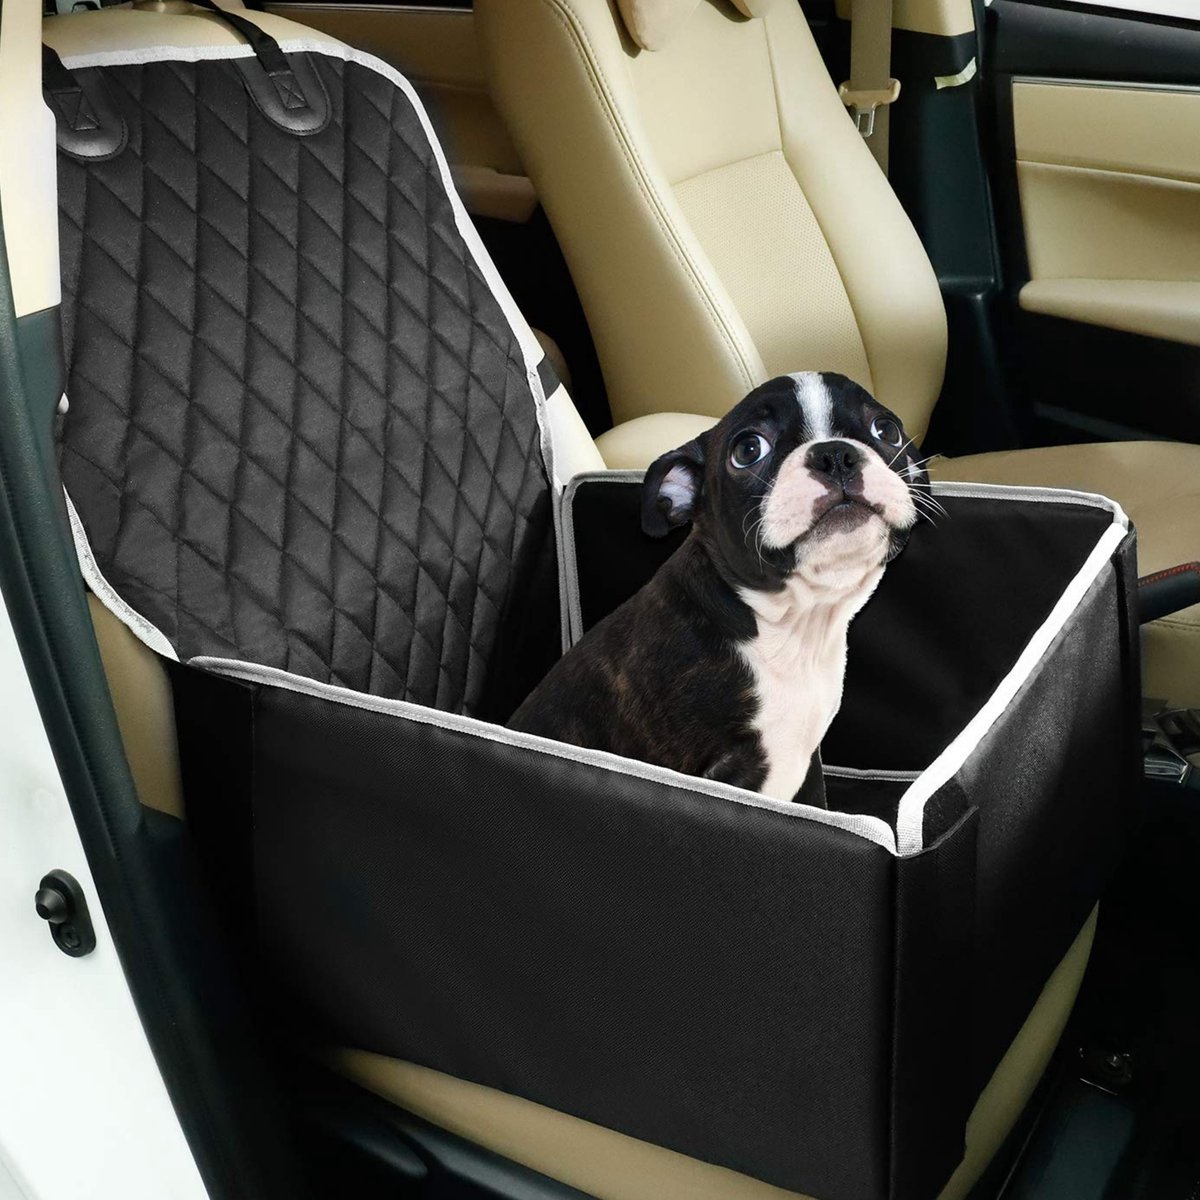 KunLS Protection Voiture Chien Protection Siege Voiture pour Chien Siège de Voiture Chien Couverture Voiture Boot Protecteur pour Chien Black 